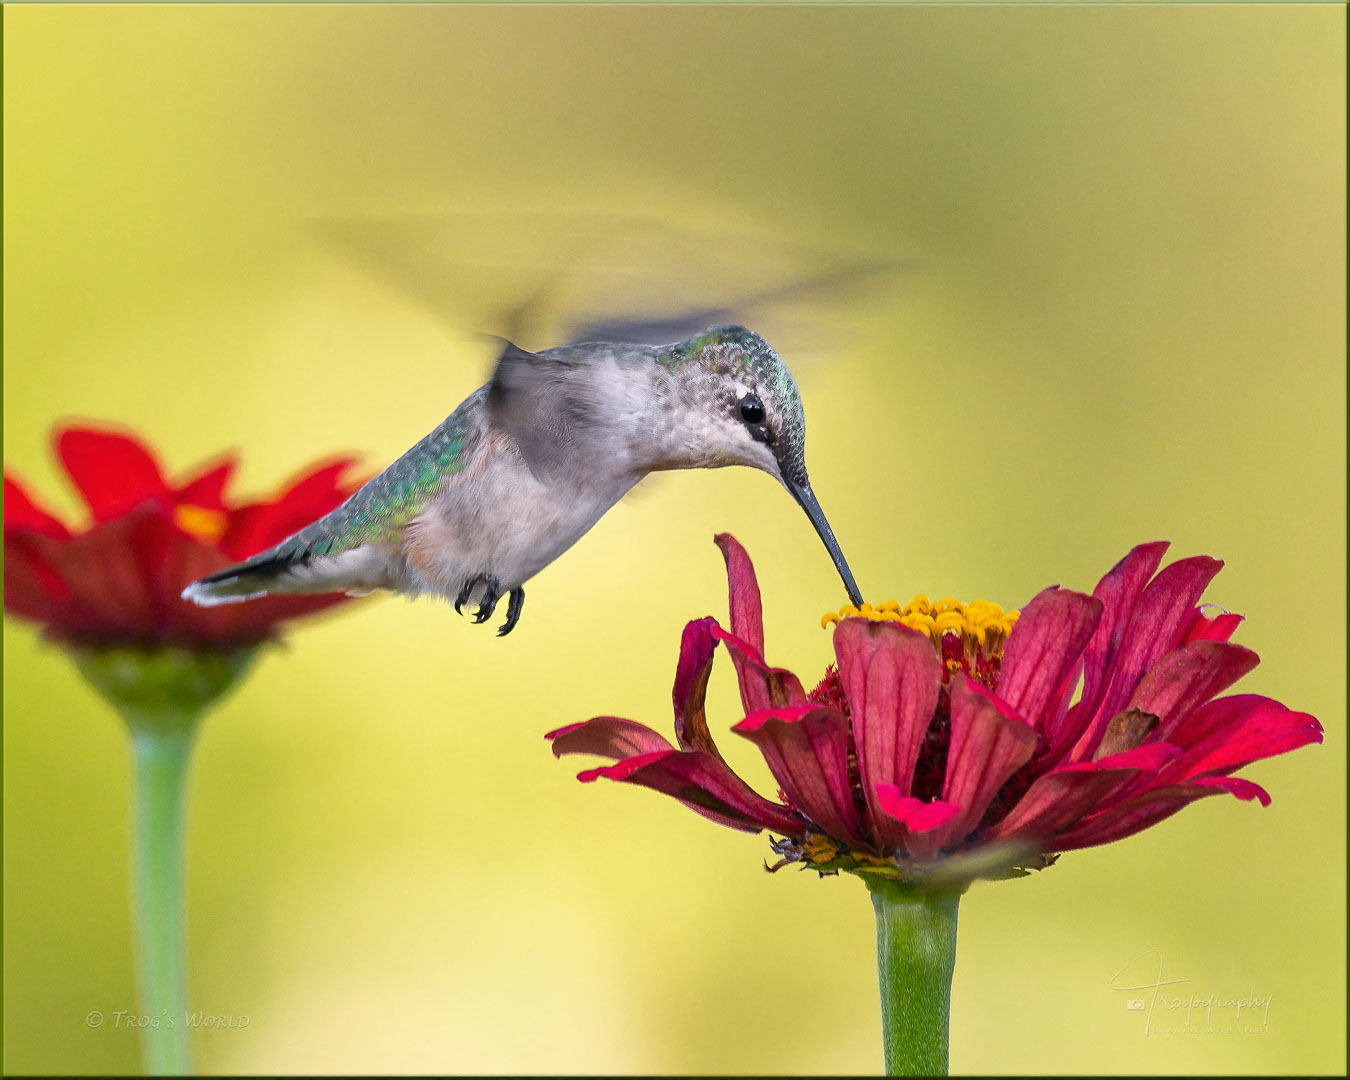 Ruby-throated Hummingbird in motion